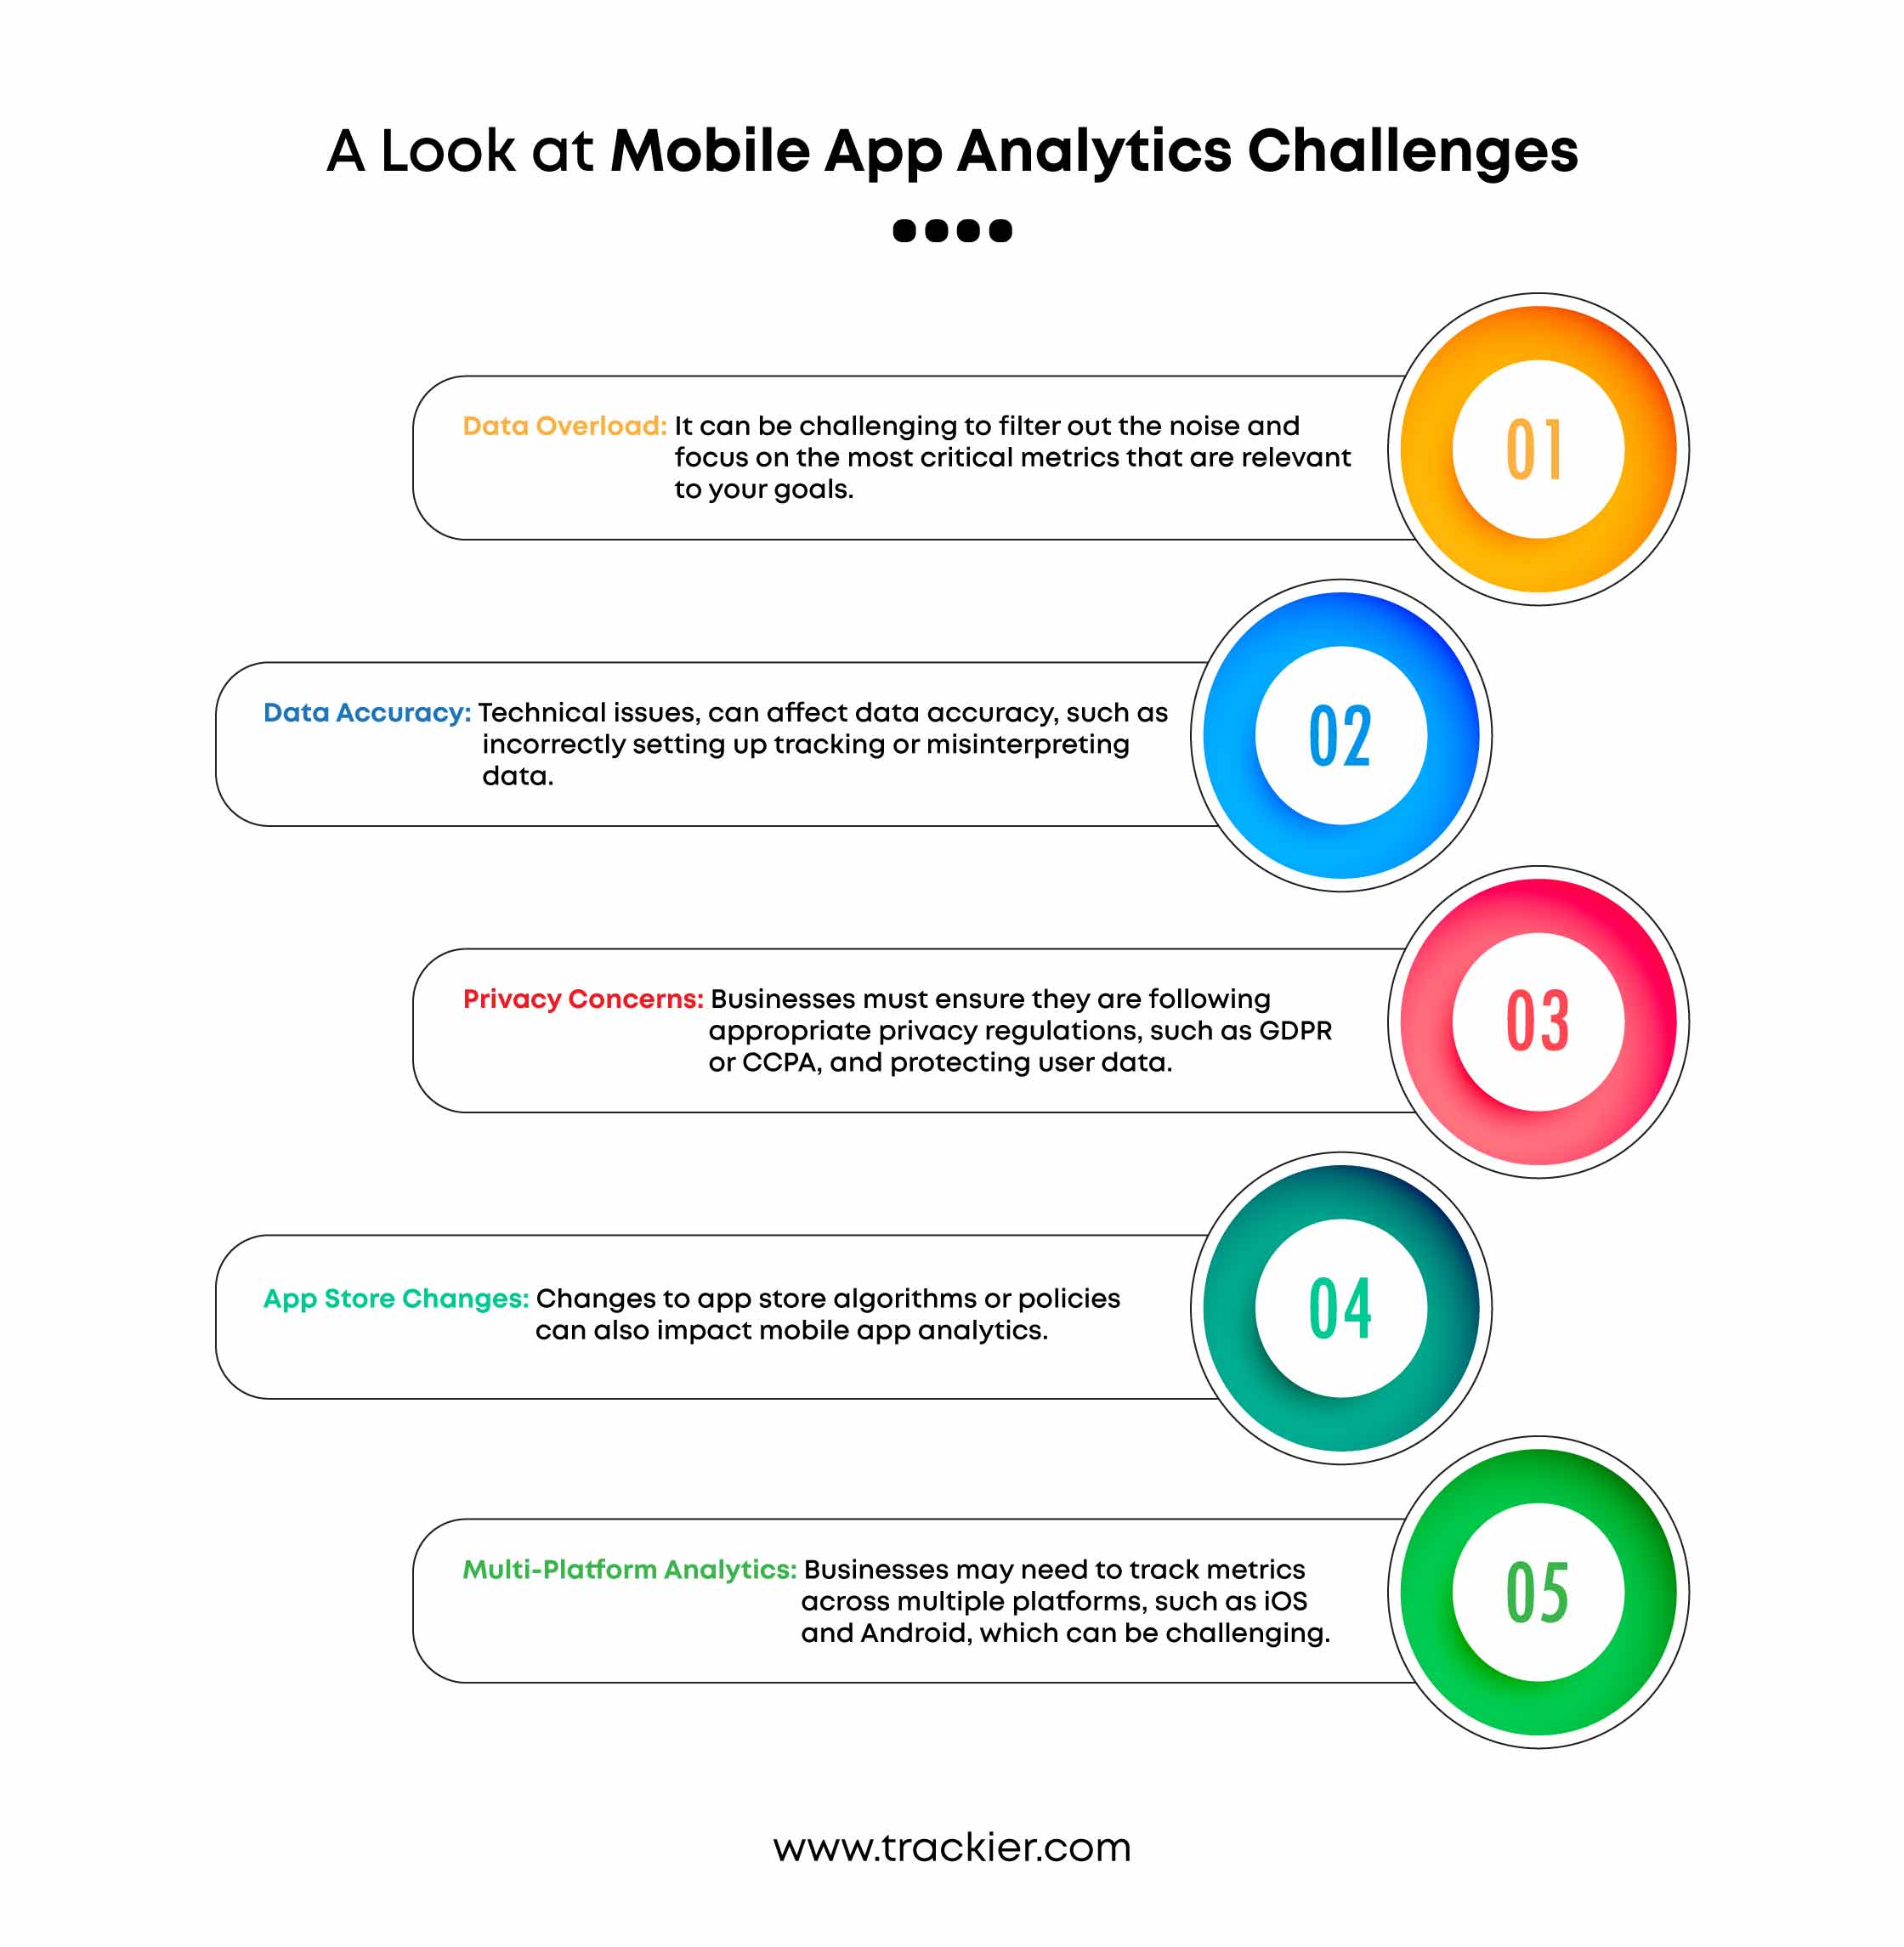 Understand the importance of mobile app analytics in gaining insights. Explore how analytics can help you make data-driven decisions.